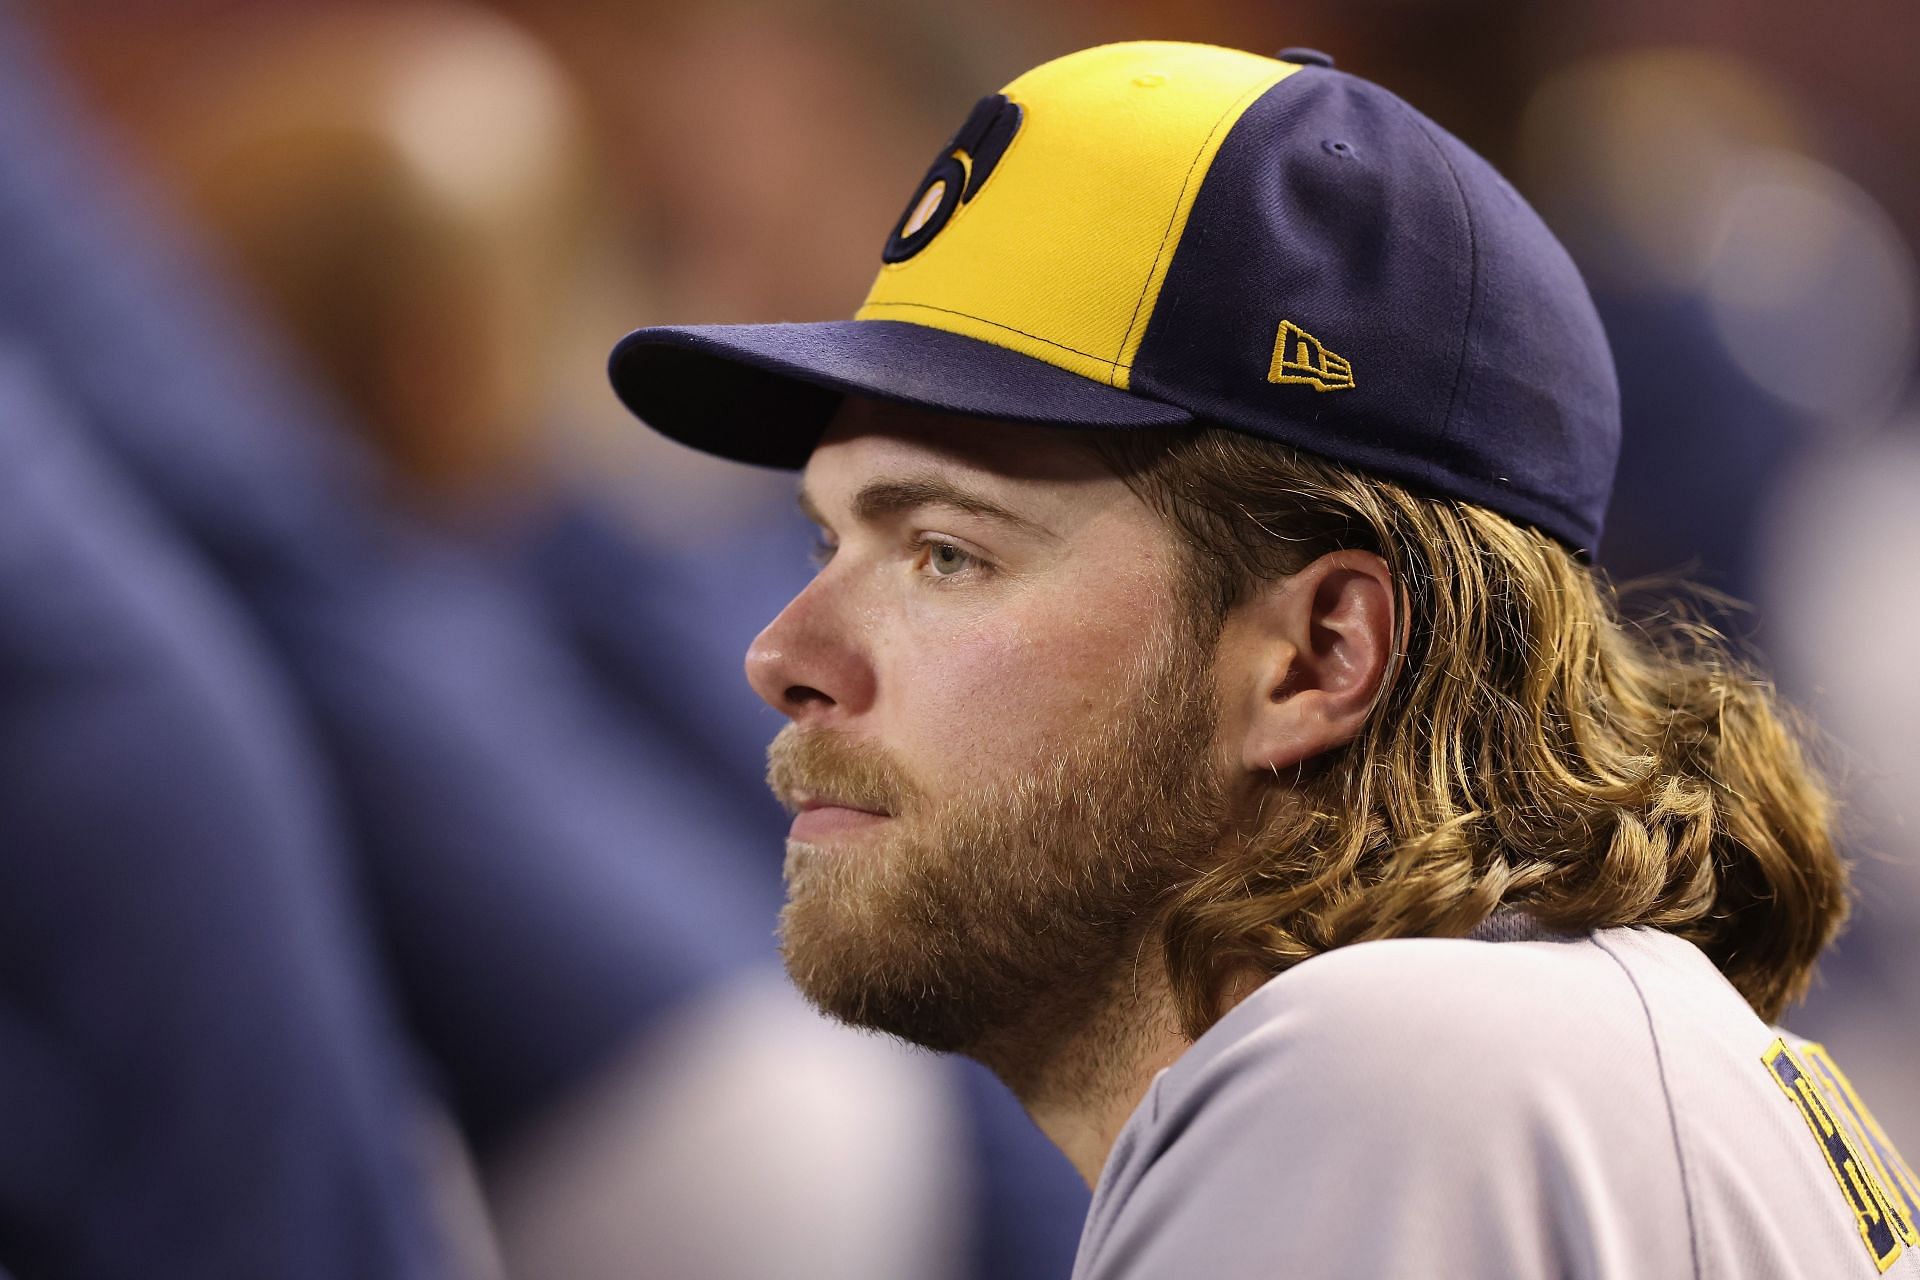 The Brewers are in danger of missing the playoffs for the first time in five years.